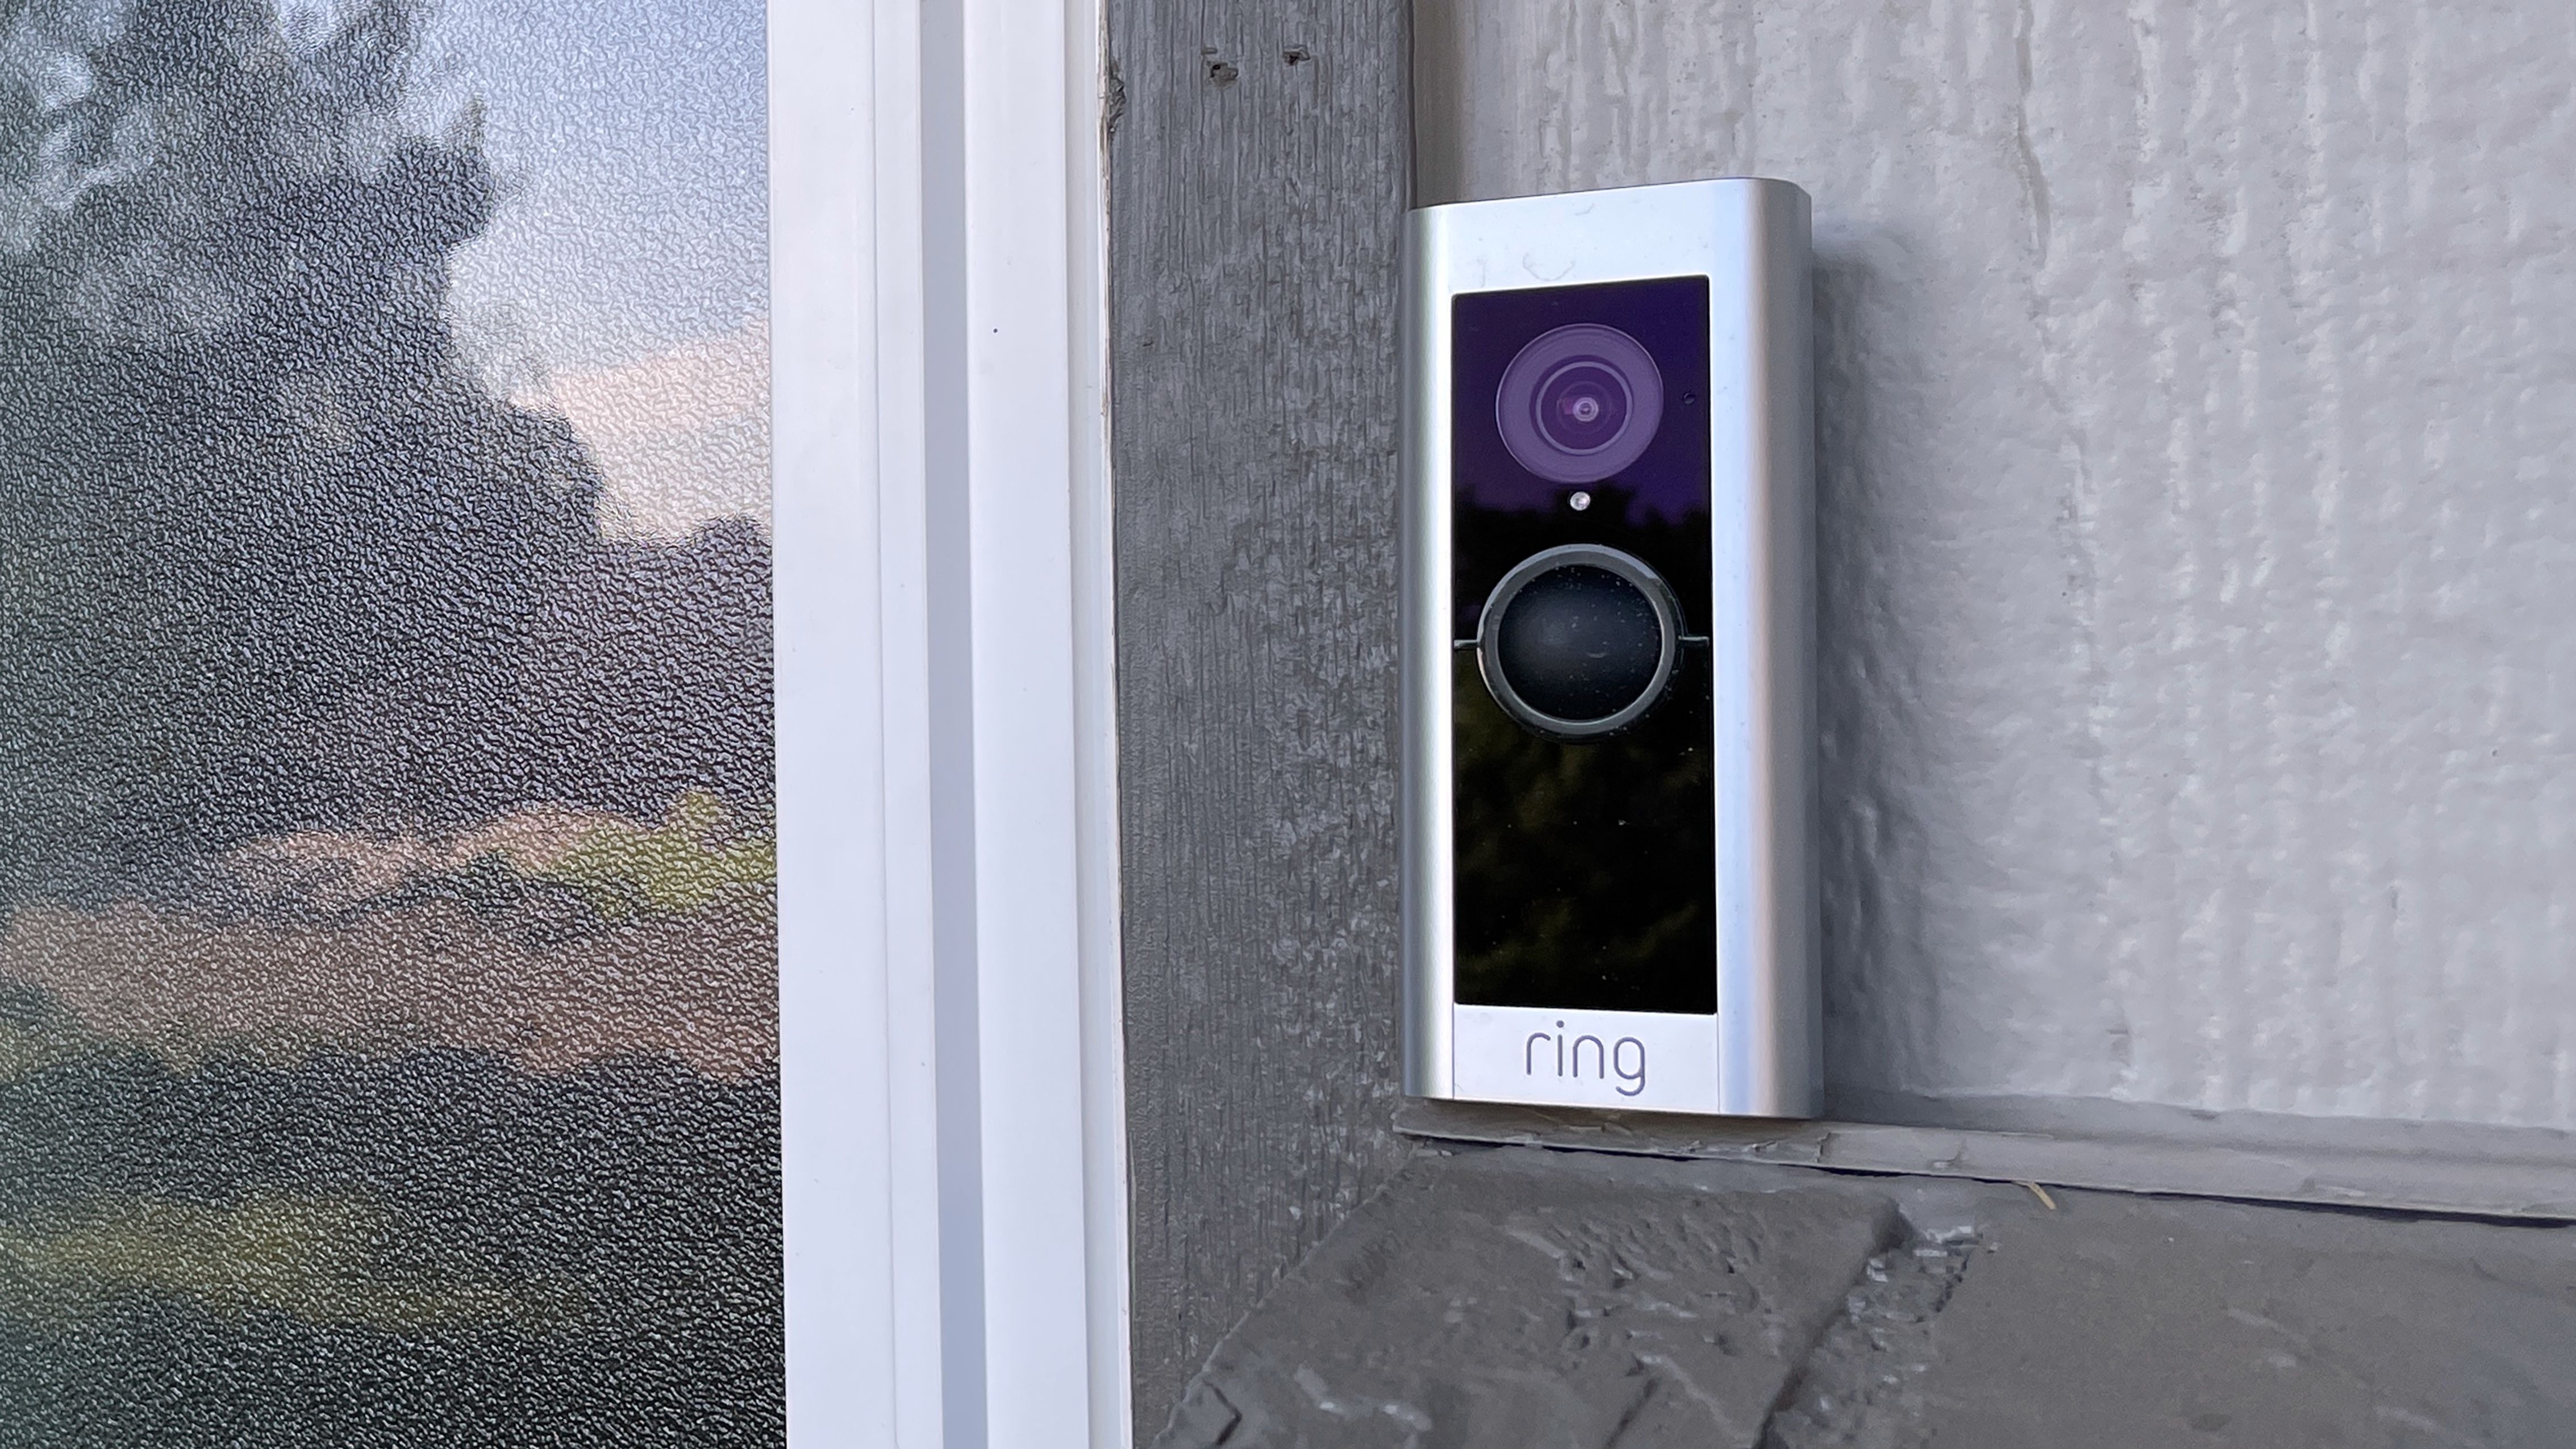 Video Doorbell, Wireless Doorbell Camera, Smart Doorbell with Motion  Detection /Night Vision/2-Way Audio/Real-Time Monitoring